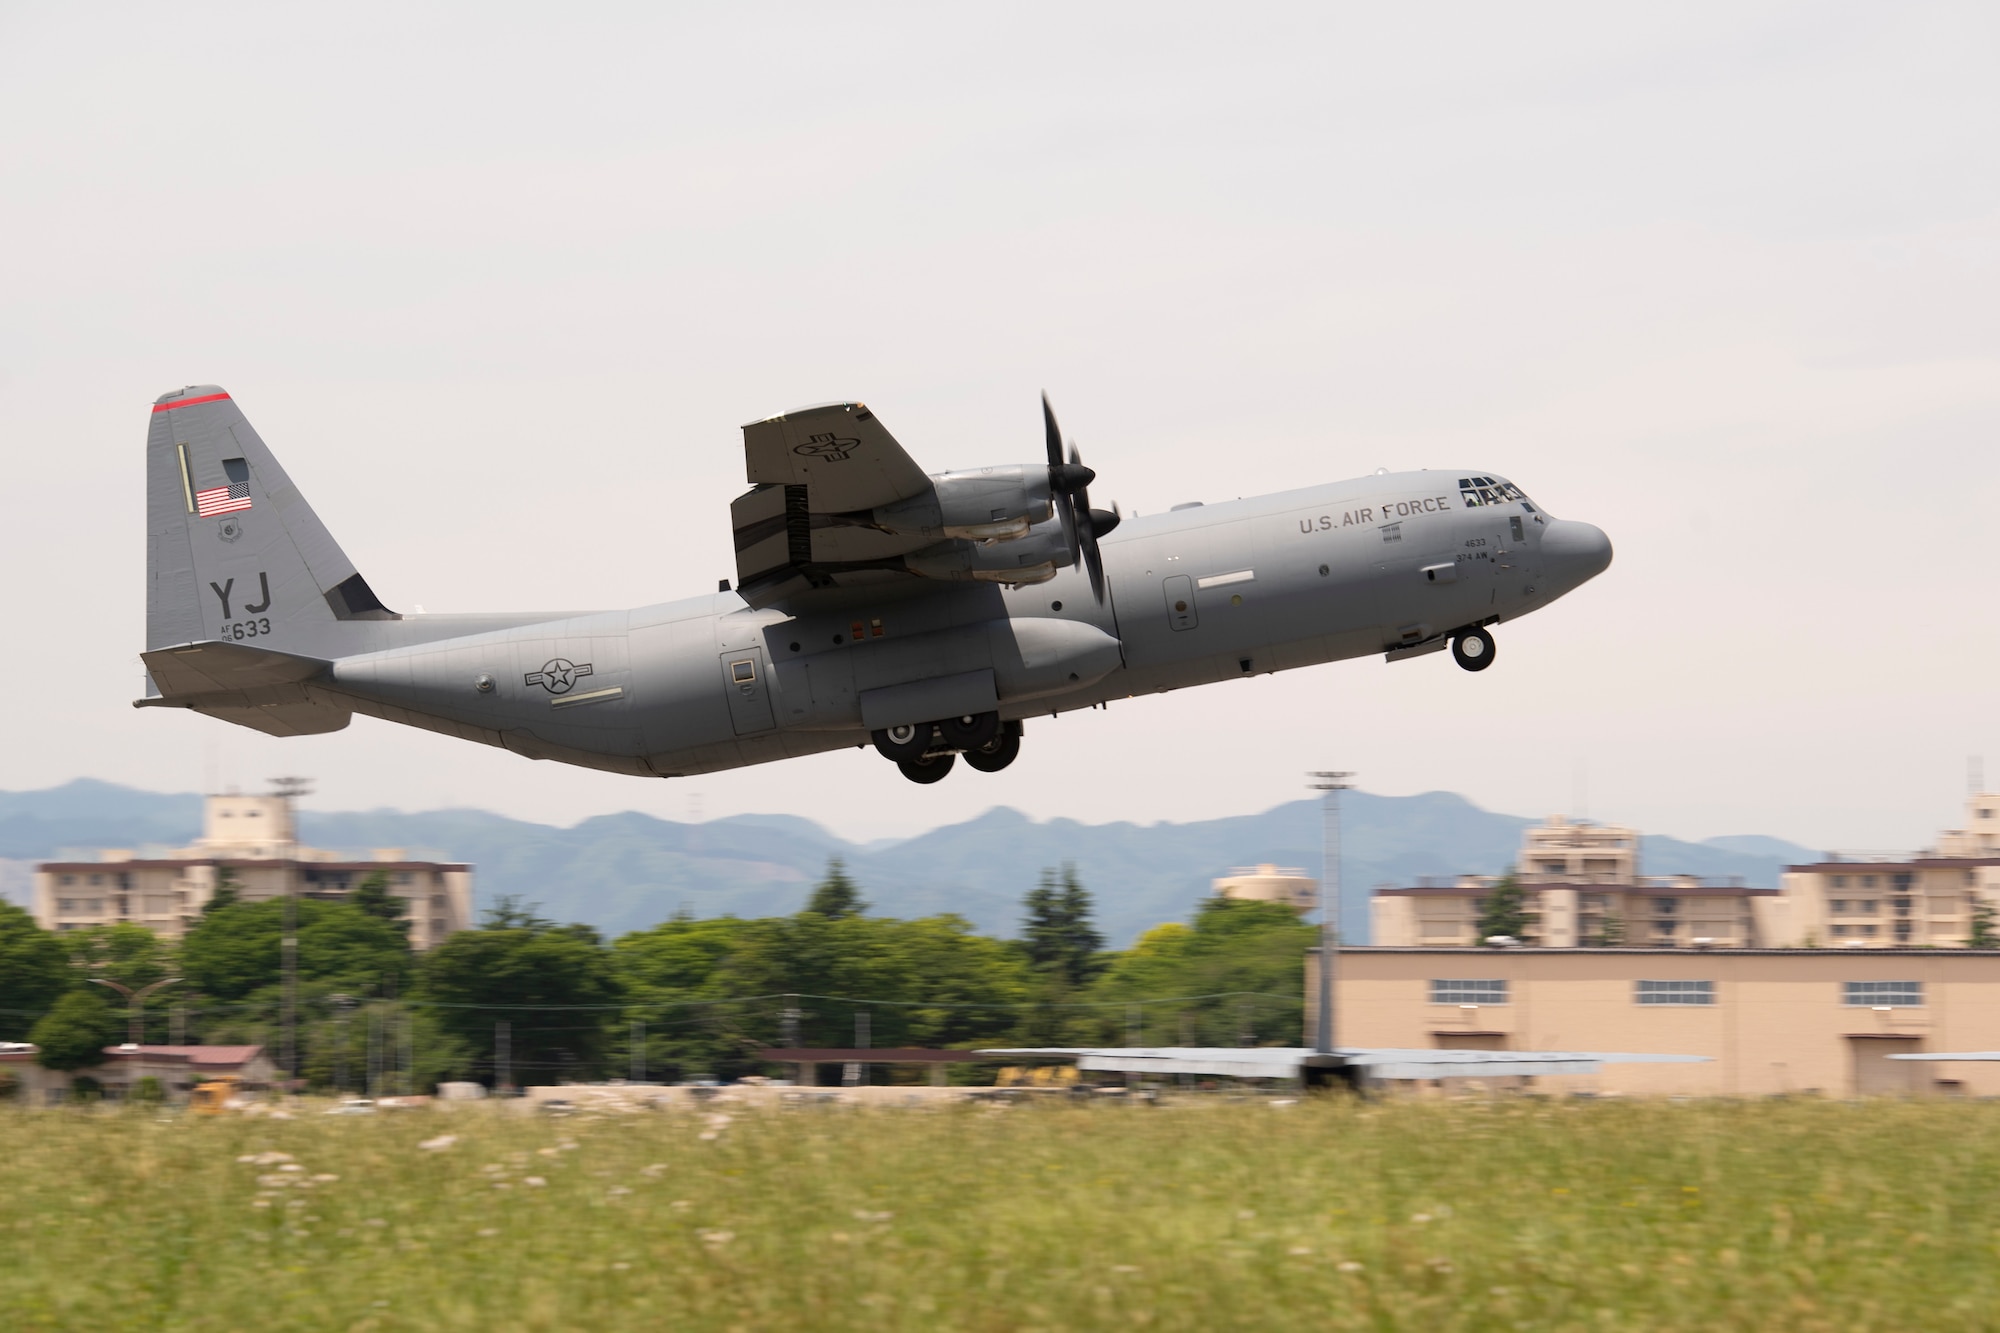 A sideways closeup view of a large prop cargo aircraft lifting off the runway during takeoff.